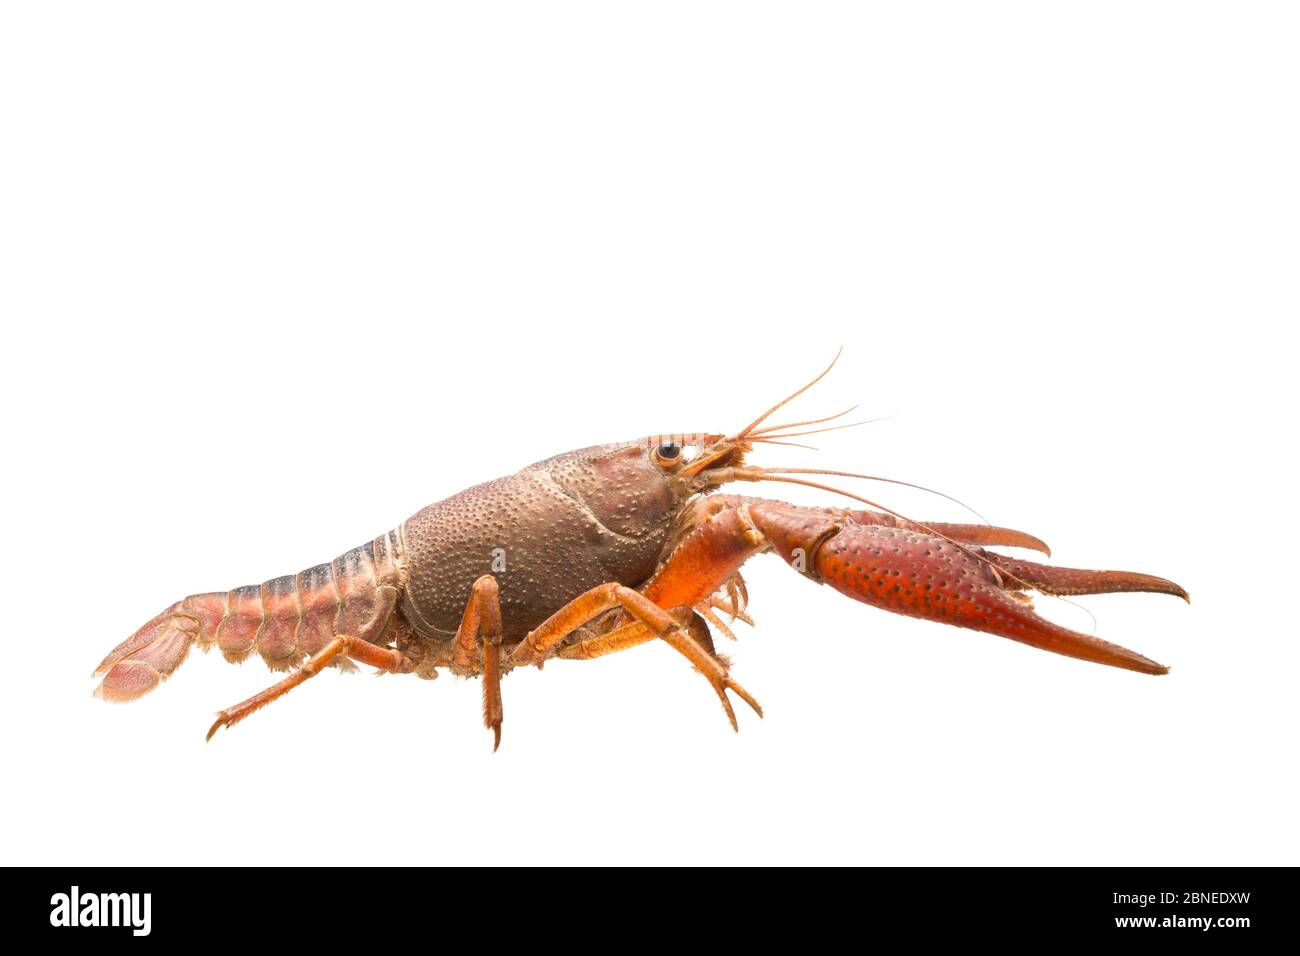 White river crayfish (Procambarus acutus) adult, The Netherlands,  May, Meetyourneighbours.net project Stock Photo